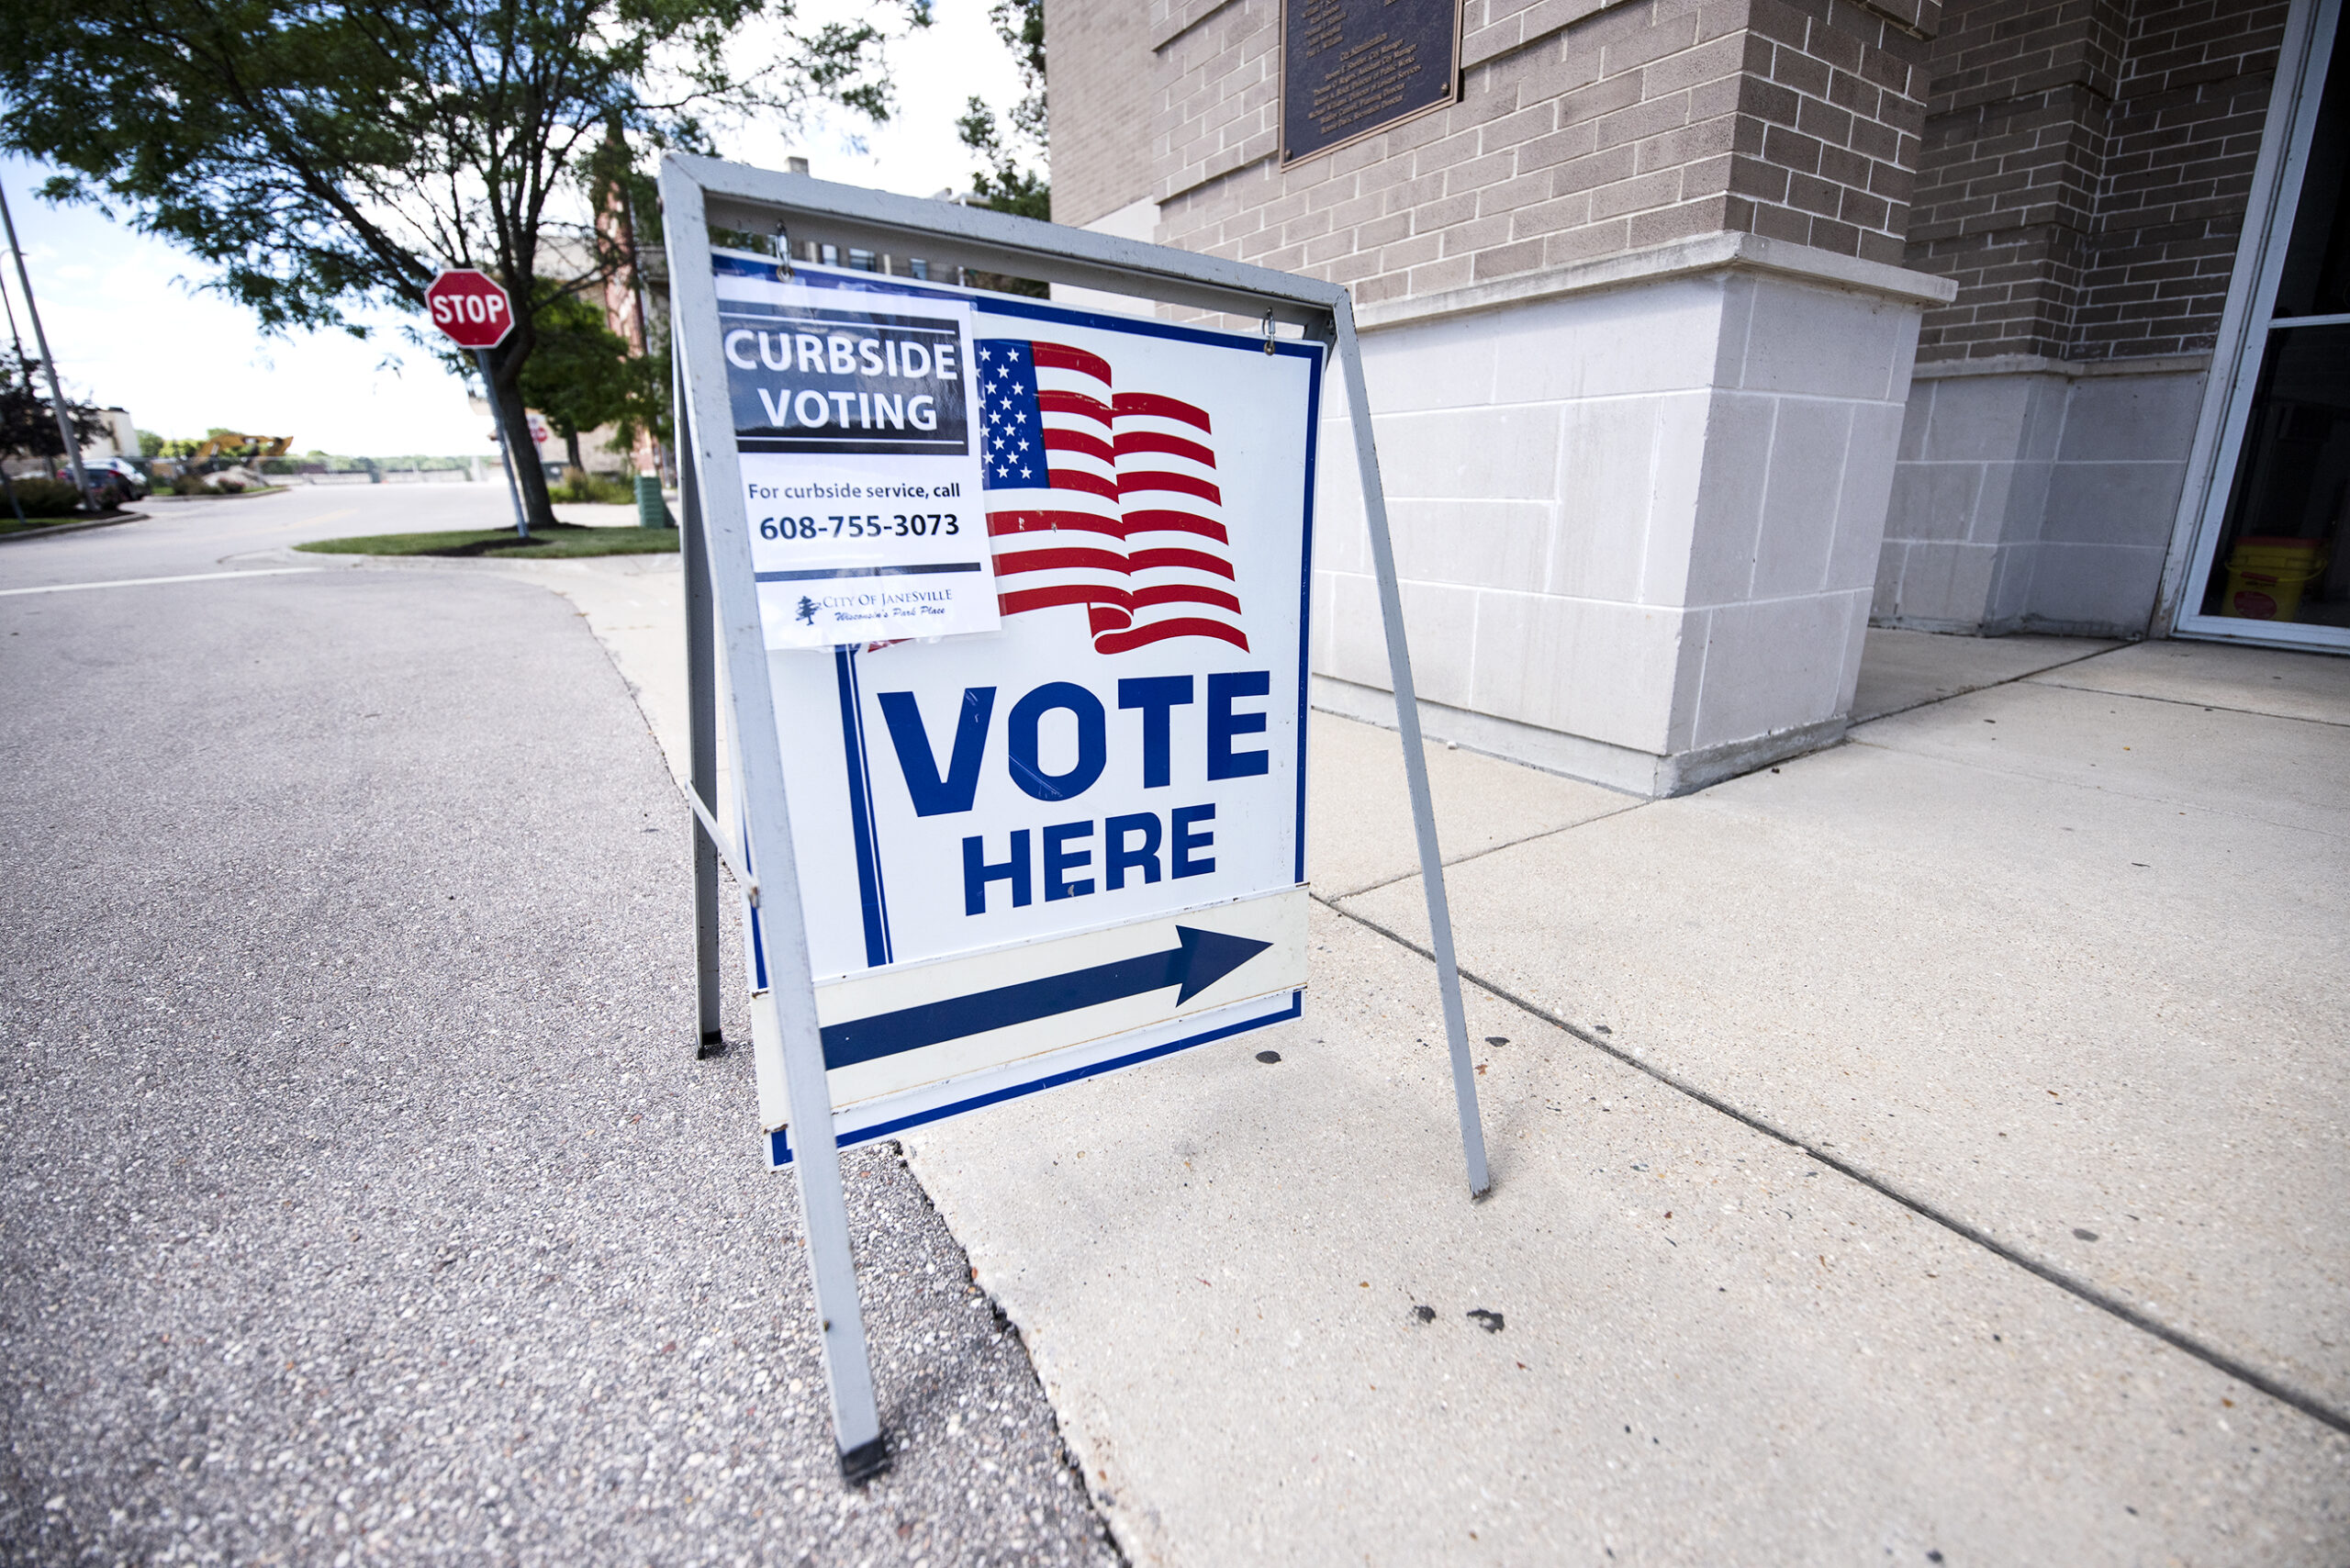 A "Vote Here" sign has an added sign about curbside voting